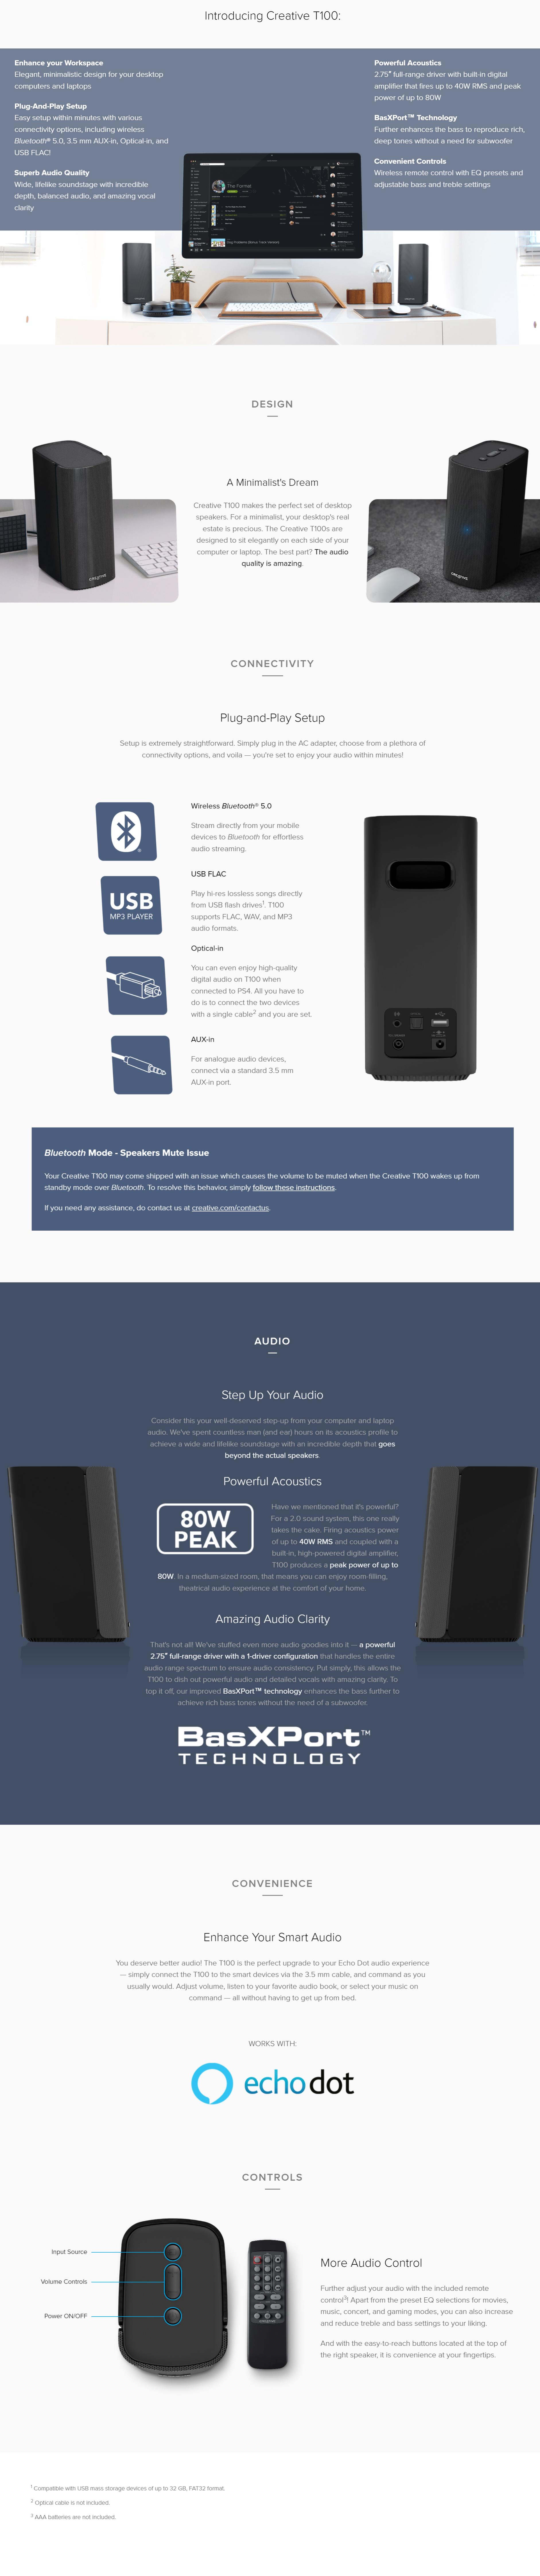 A large marketing image providing additional information about the product Creative T100 Compact Hi-Fi 2.0 Bluetooth Speakers - Additional alt info not provided